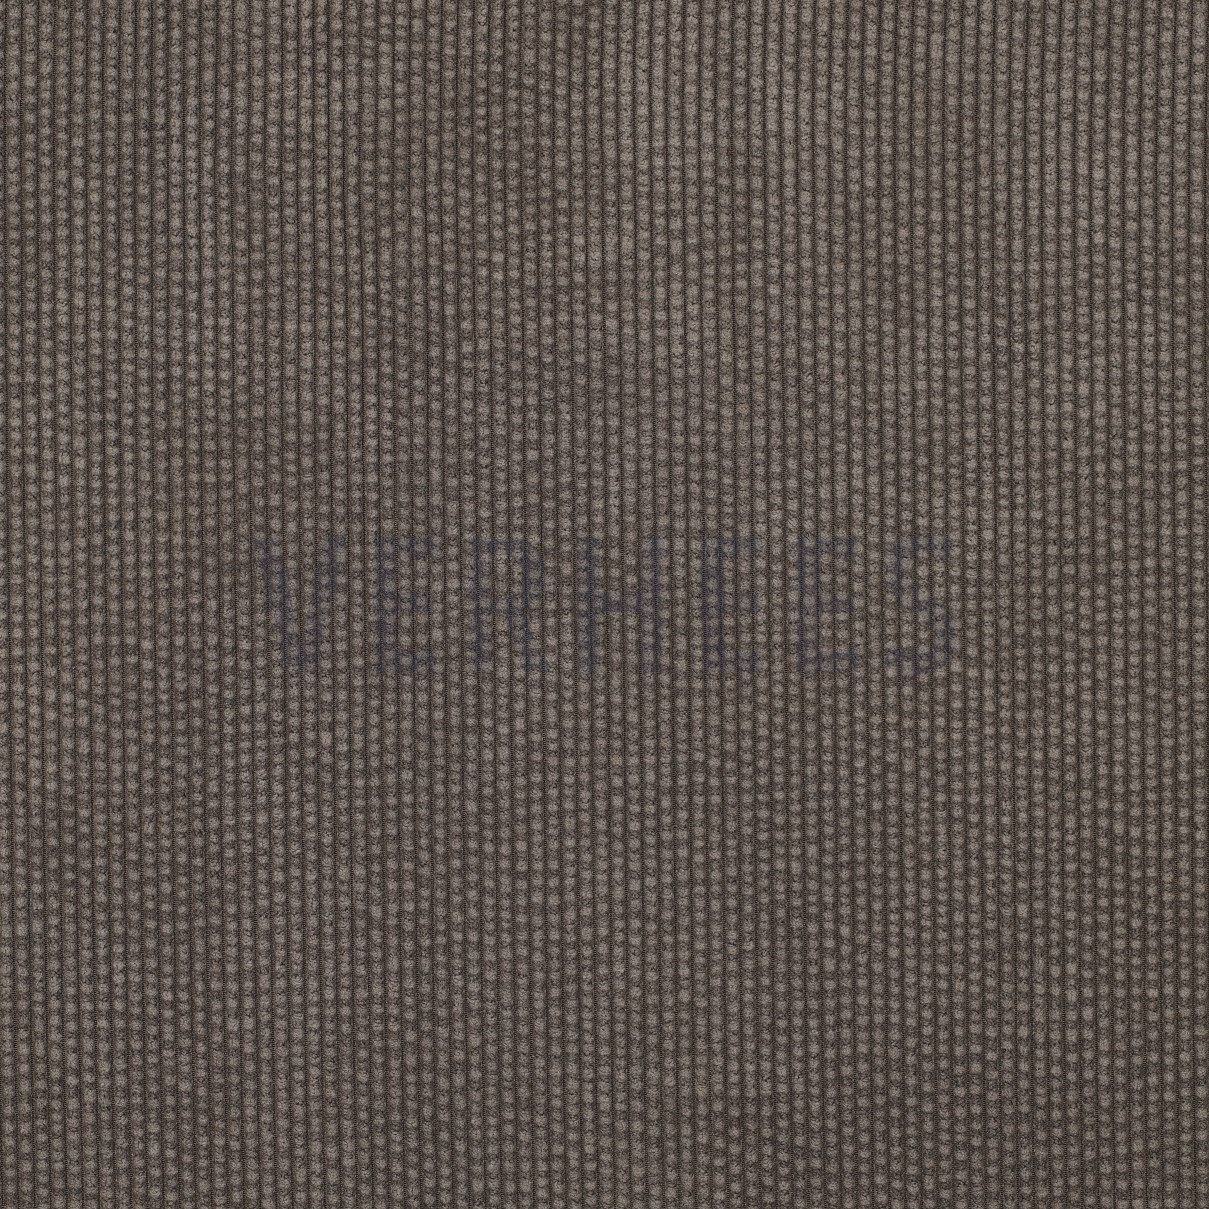 CORDUROY BUBBLE TAUPE (high resolution)